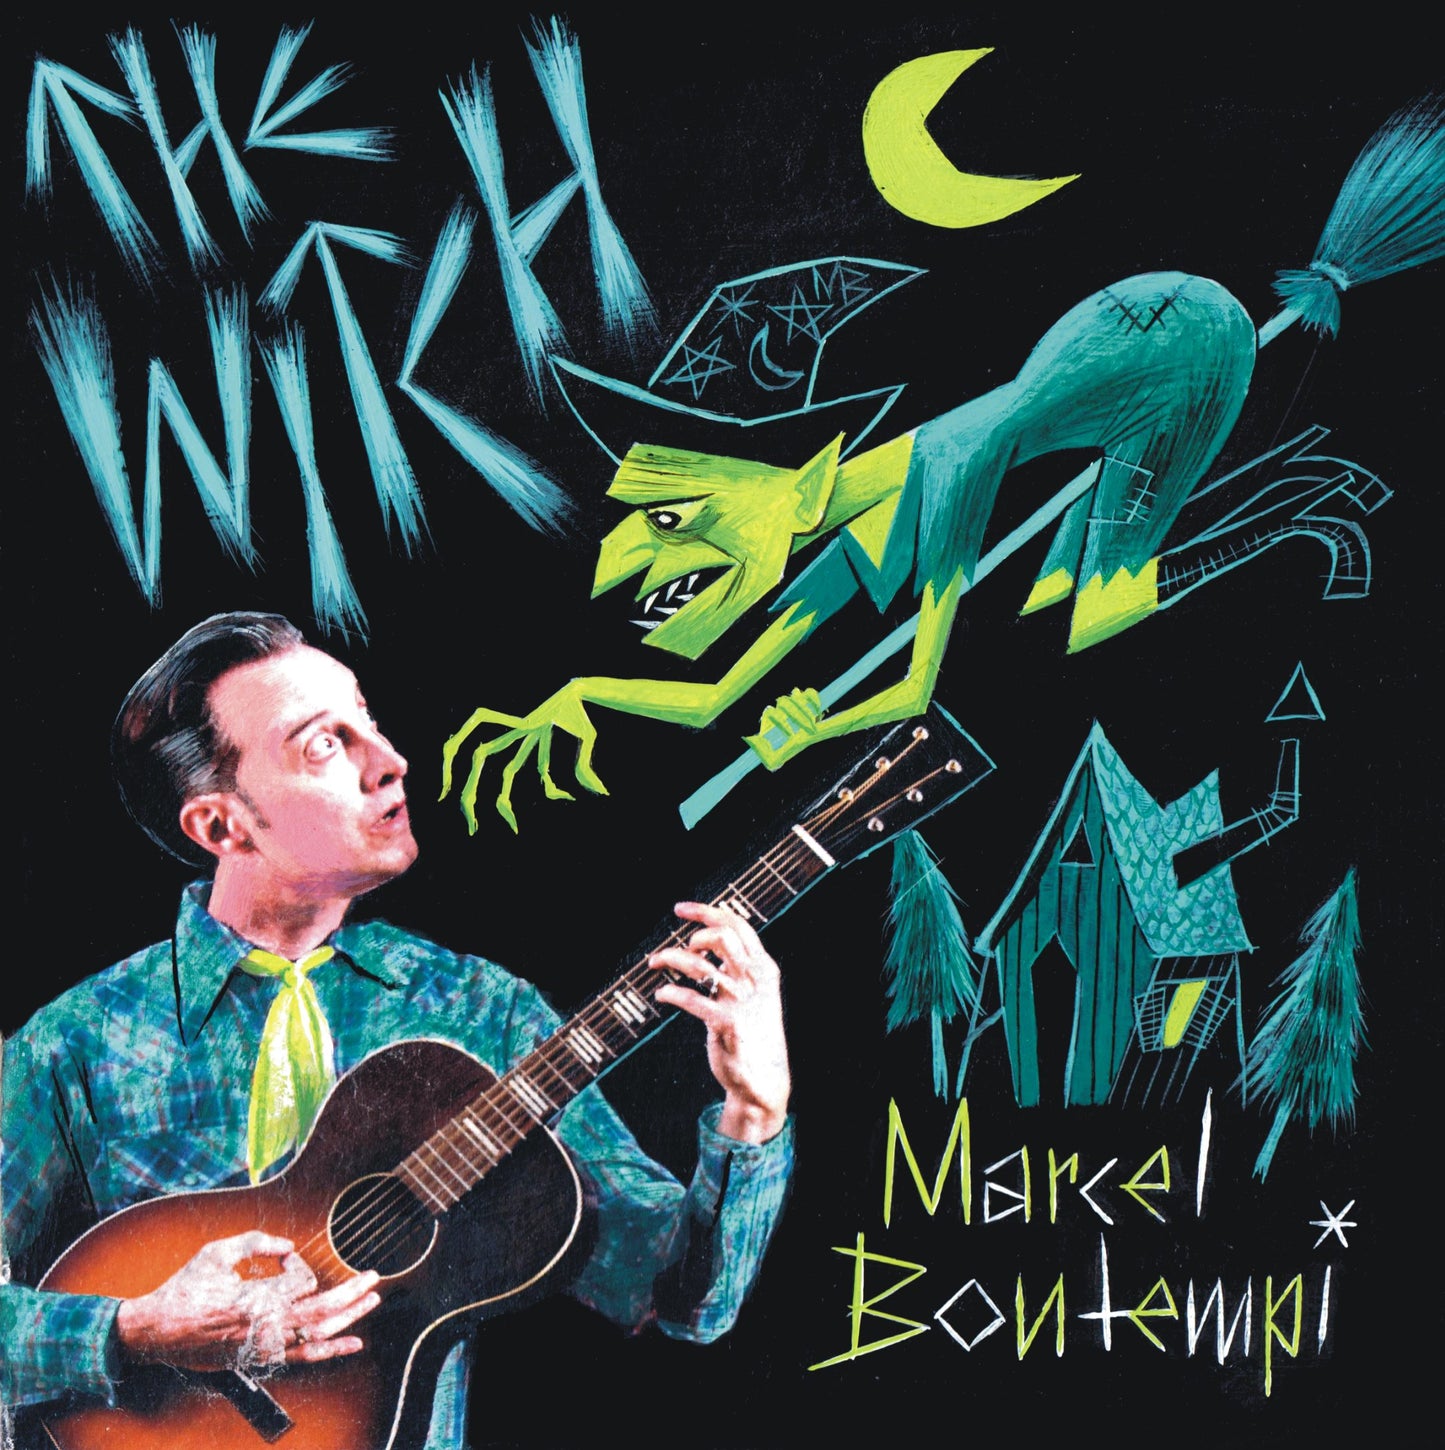 Marcel Bontempi “The Witch” 45